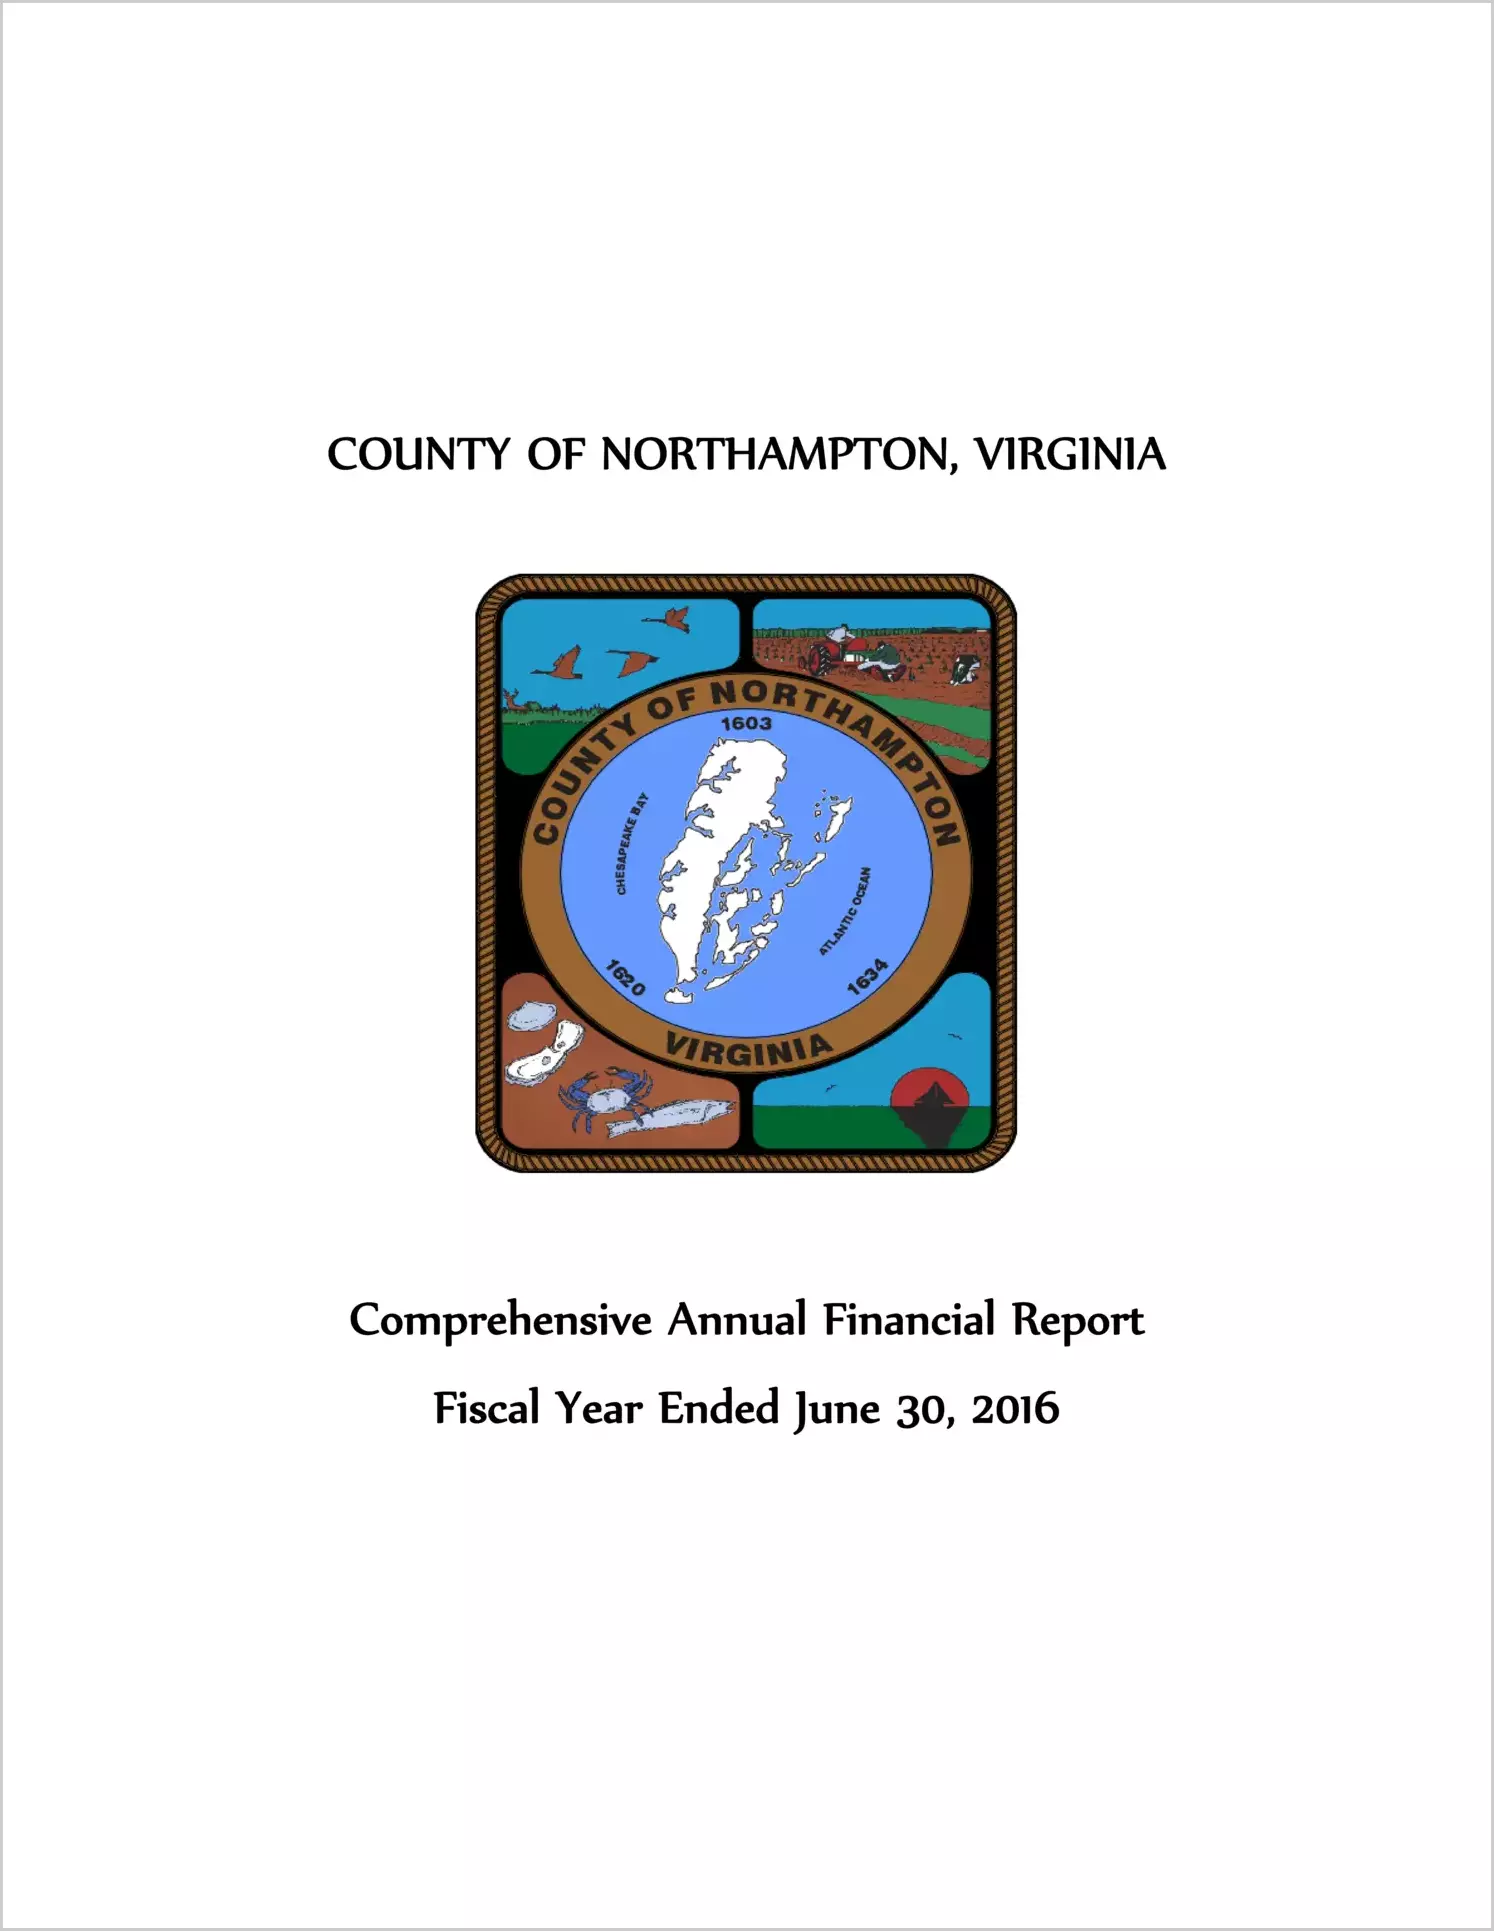 2016 Annual Financial Report for County of Northampton